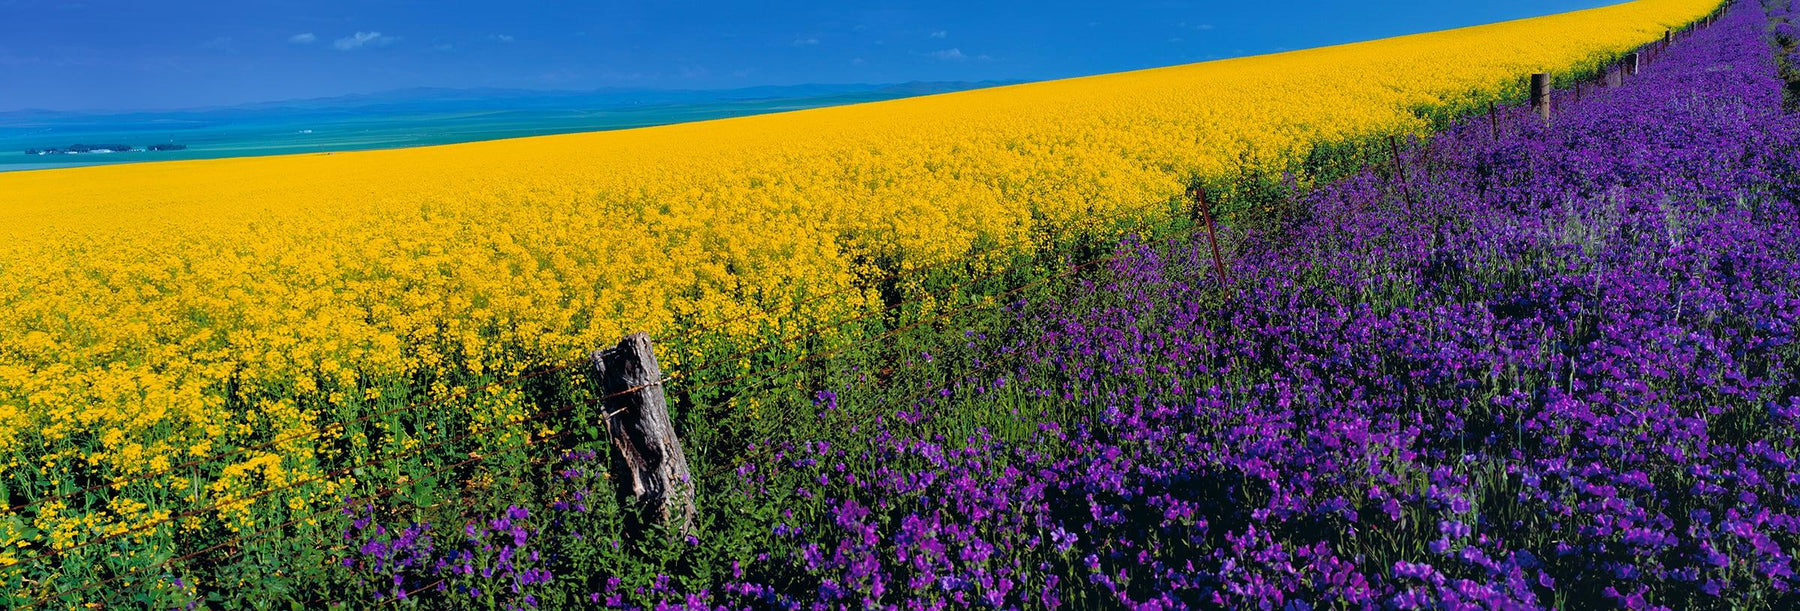 Wood and barb wire fence separating a yellow and violet flower fields in Burra Australia